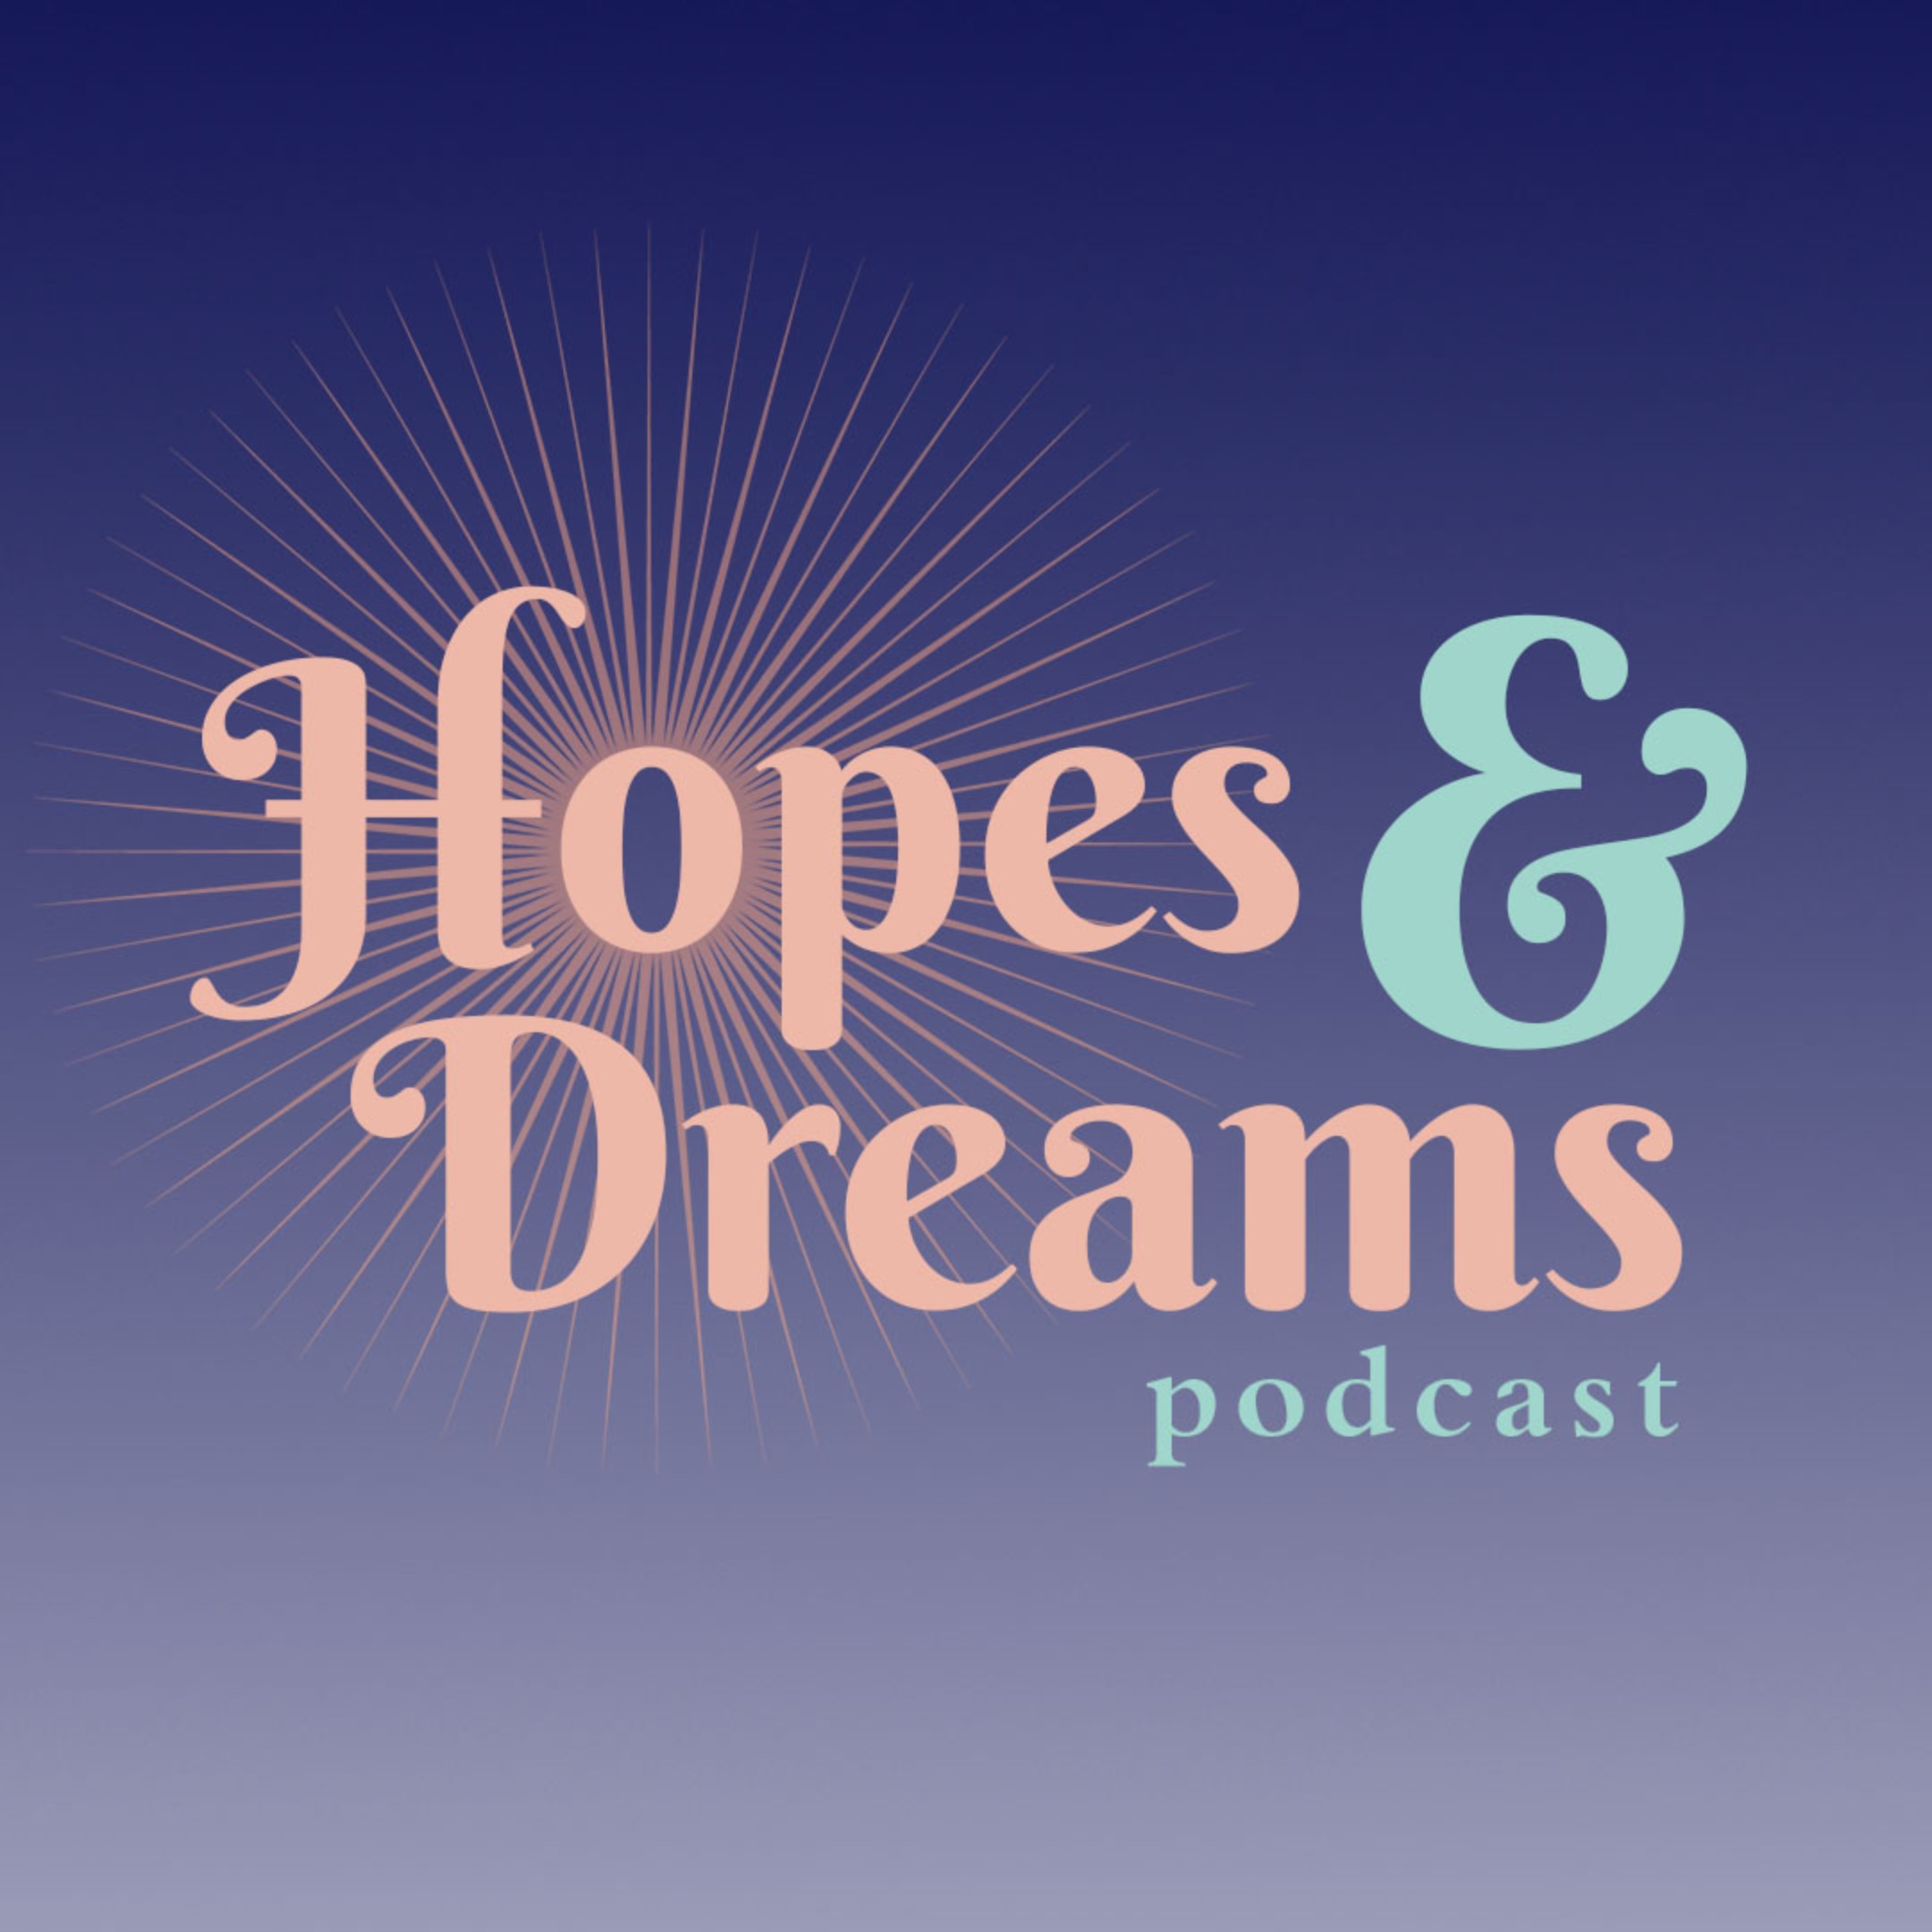 The Hopes & Dreams Podcast